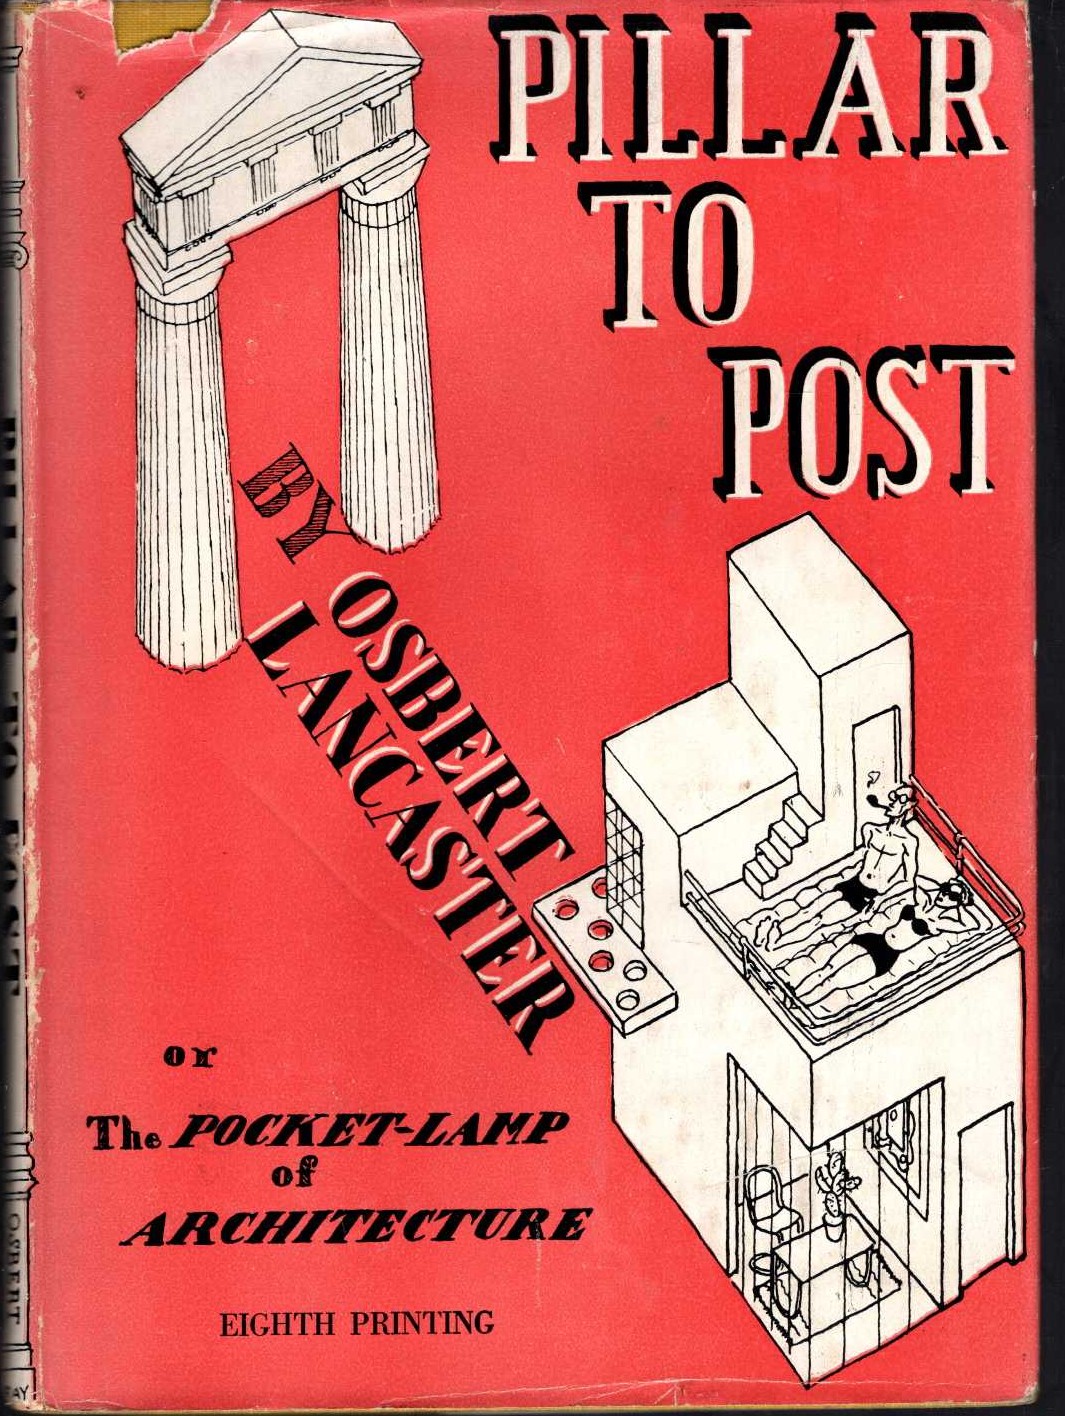 PILLAR TO POST front book cover image